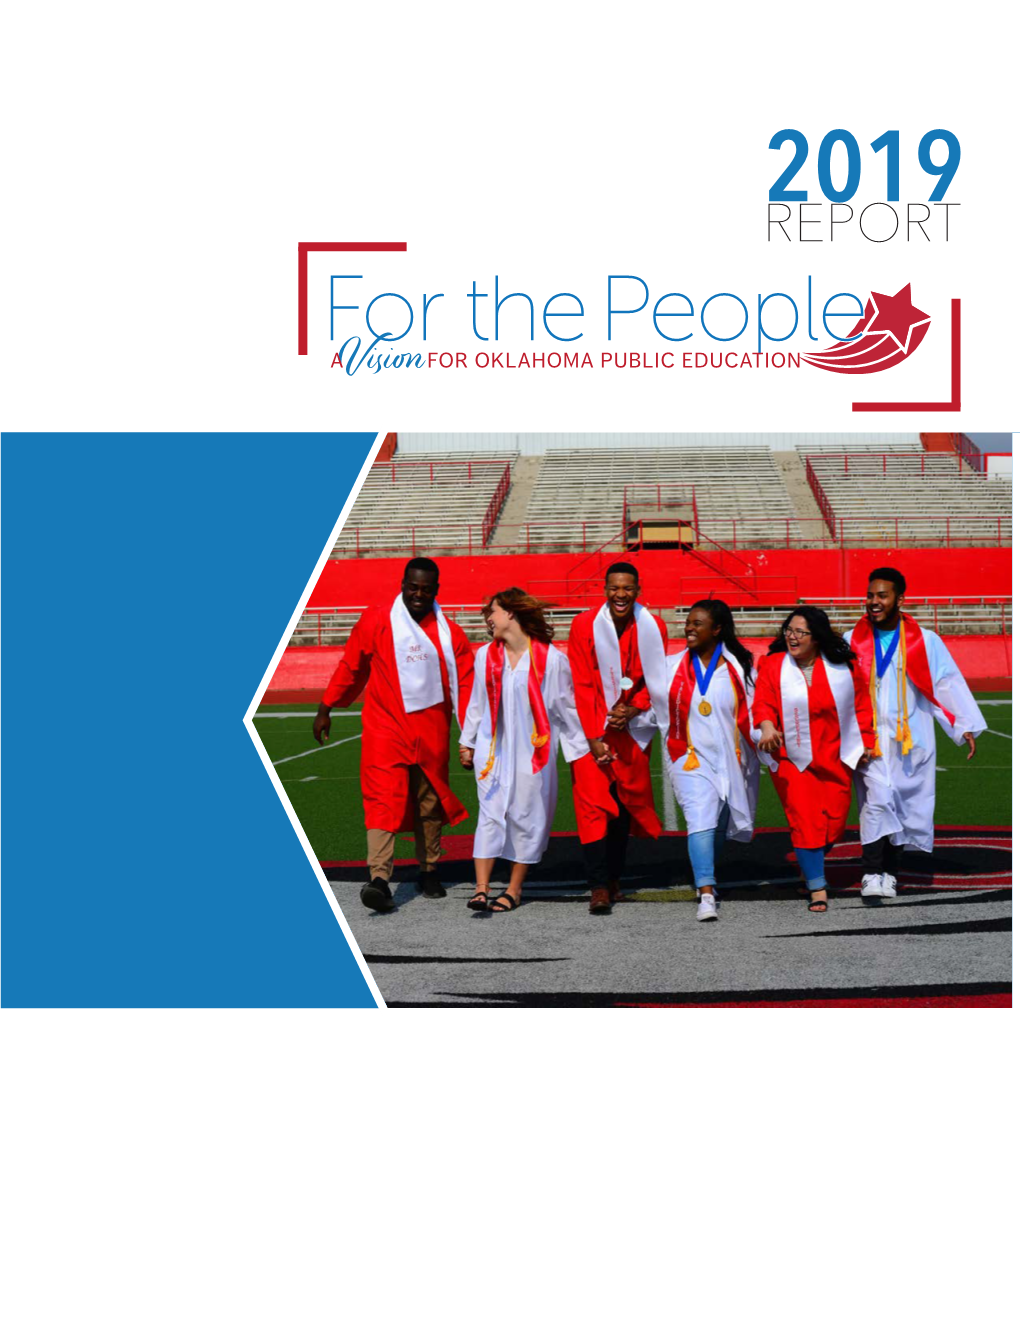 For the People: a Vision for Oklahoma Public Education 2019 Report 2